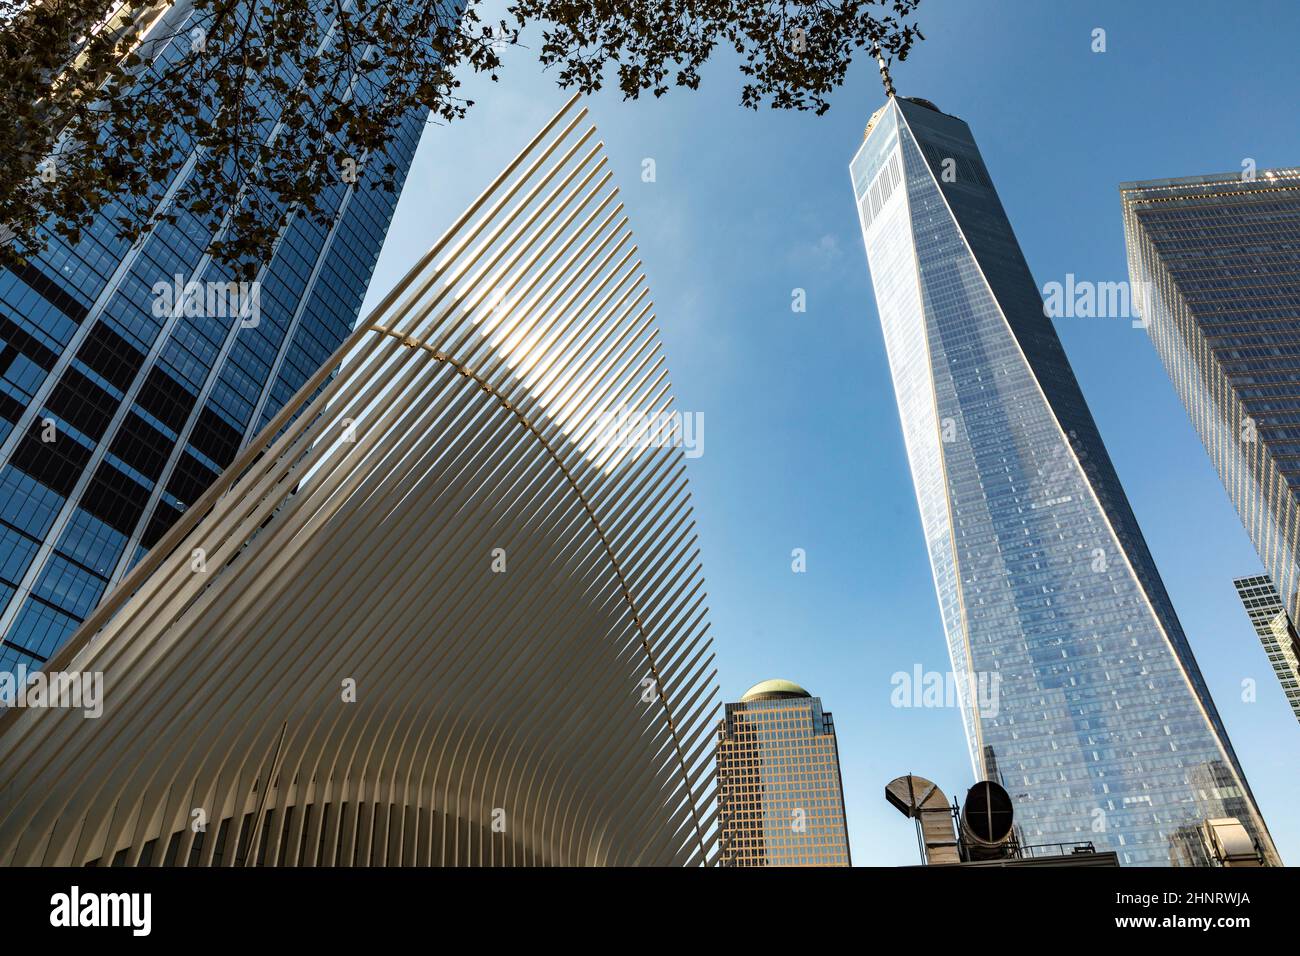 Distinctive architectural form of the Oculus transportation hub stands in front of a bright view of the One World Trade Center tower Stock Photo